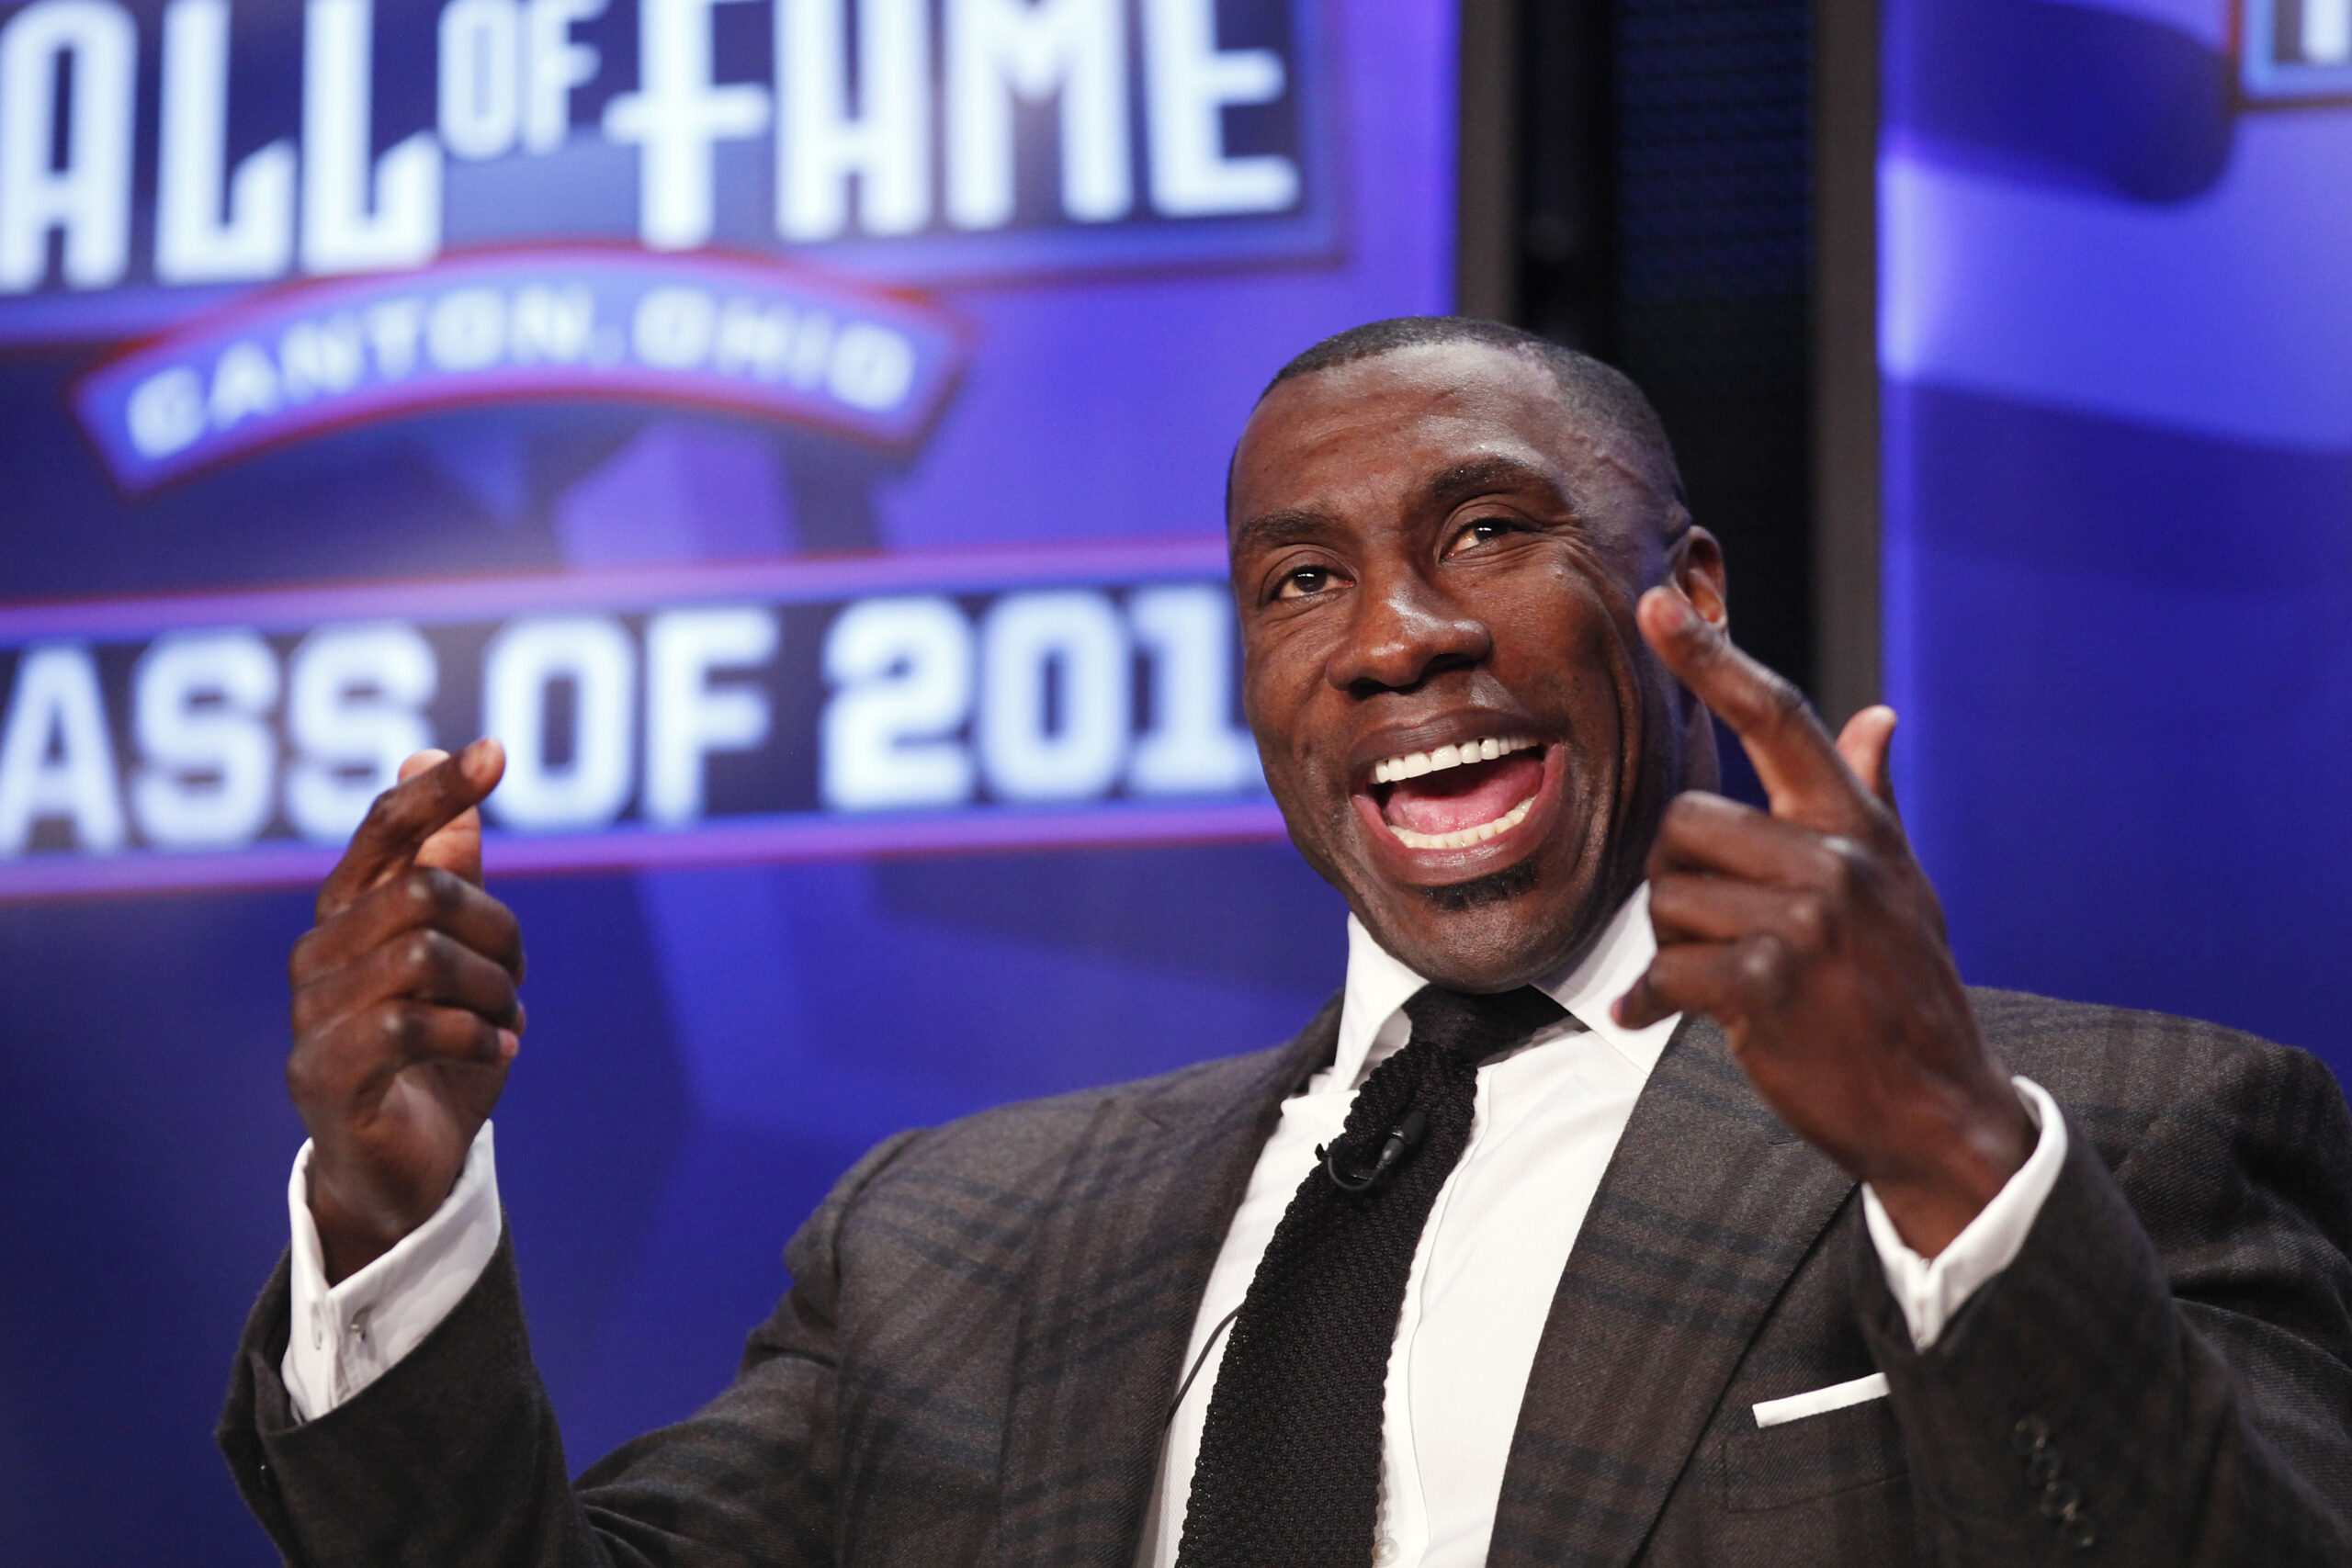 Shannon Sharpe Gets Real With Chad Johnson About His Hall Of Fame Hopes